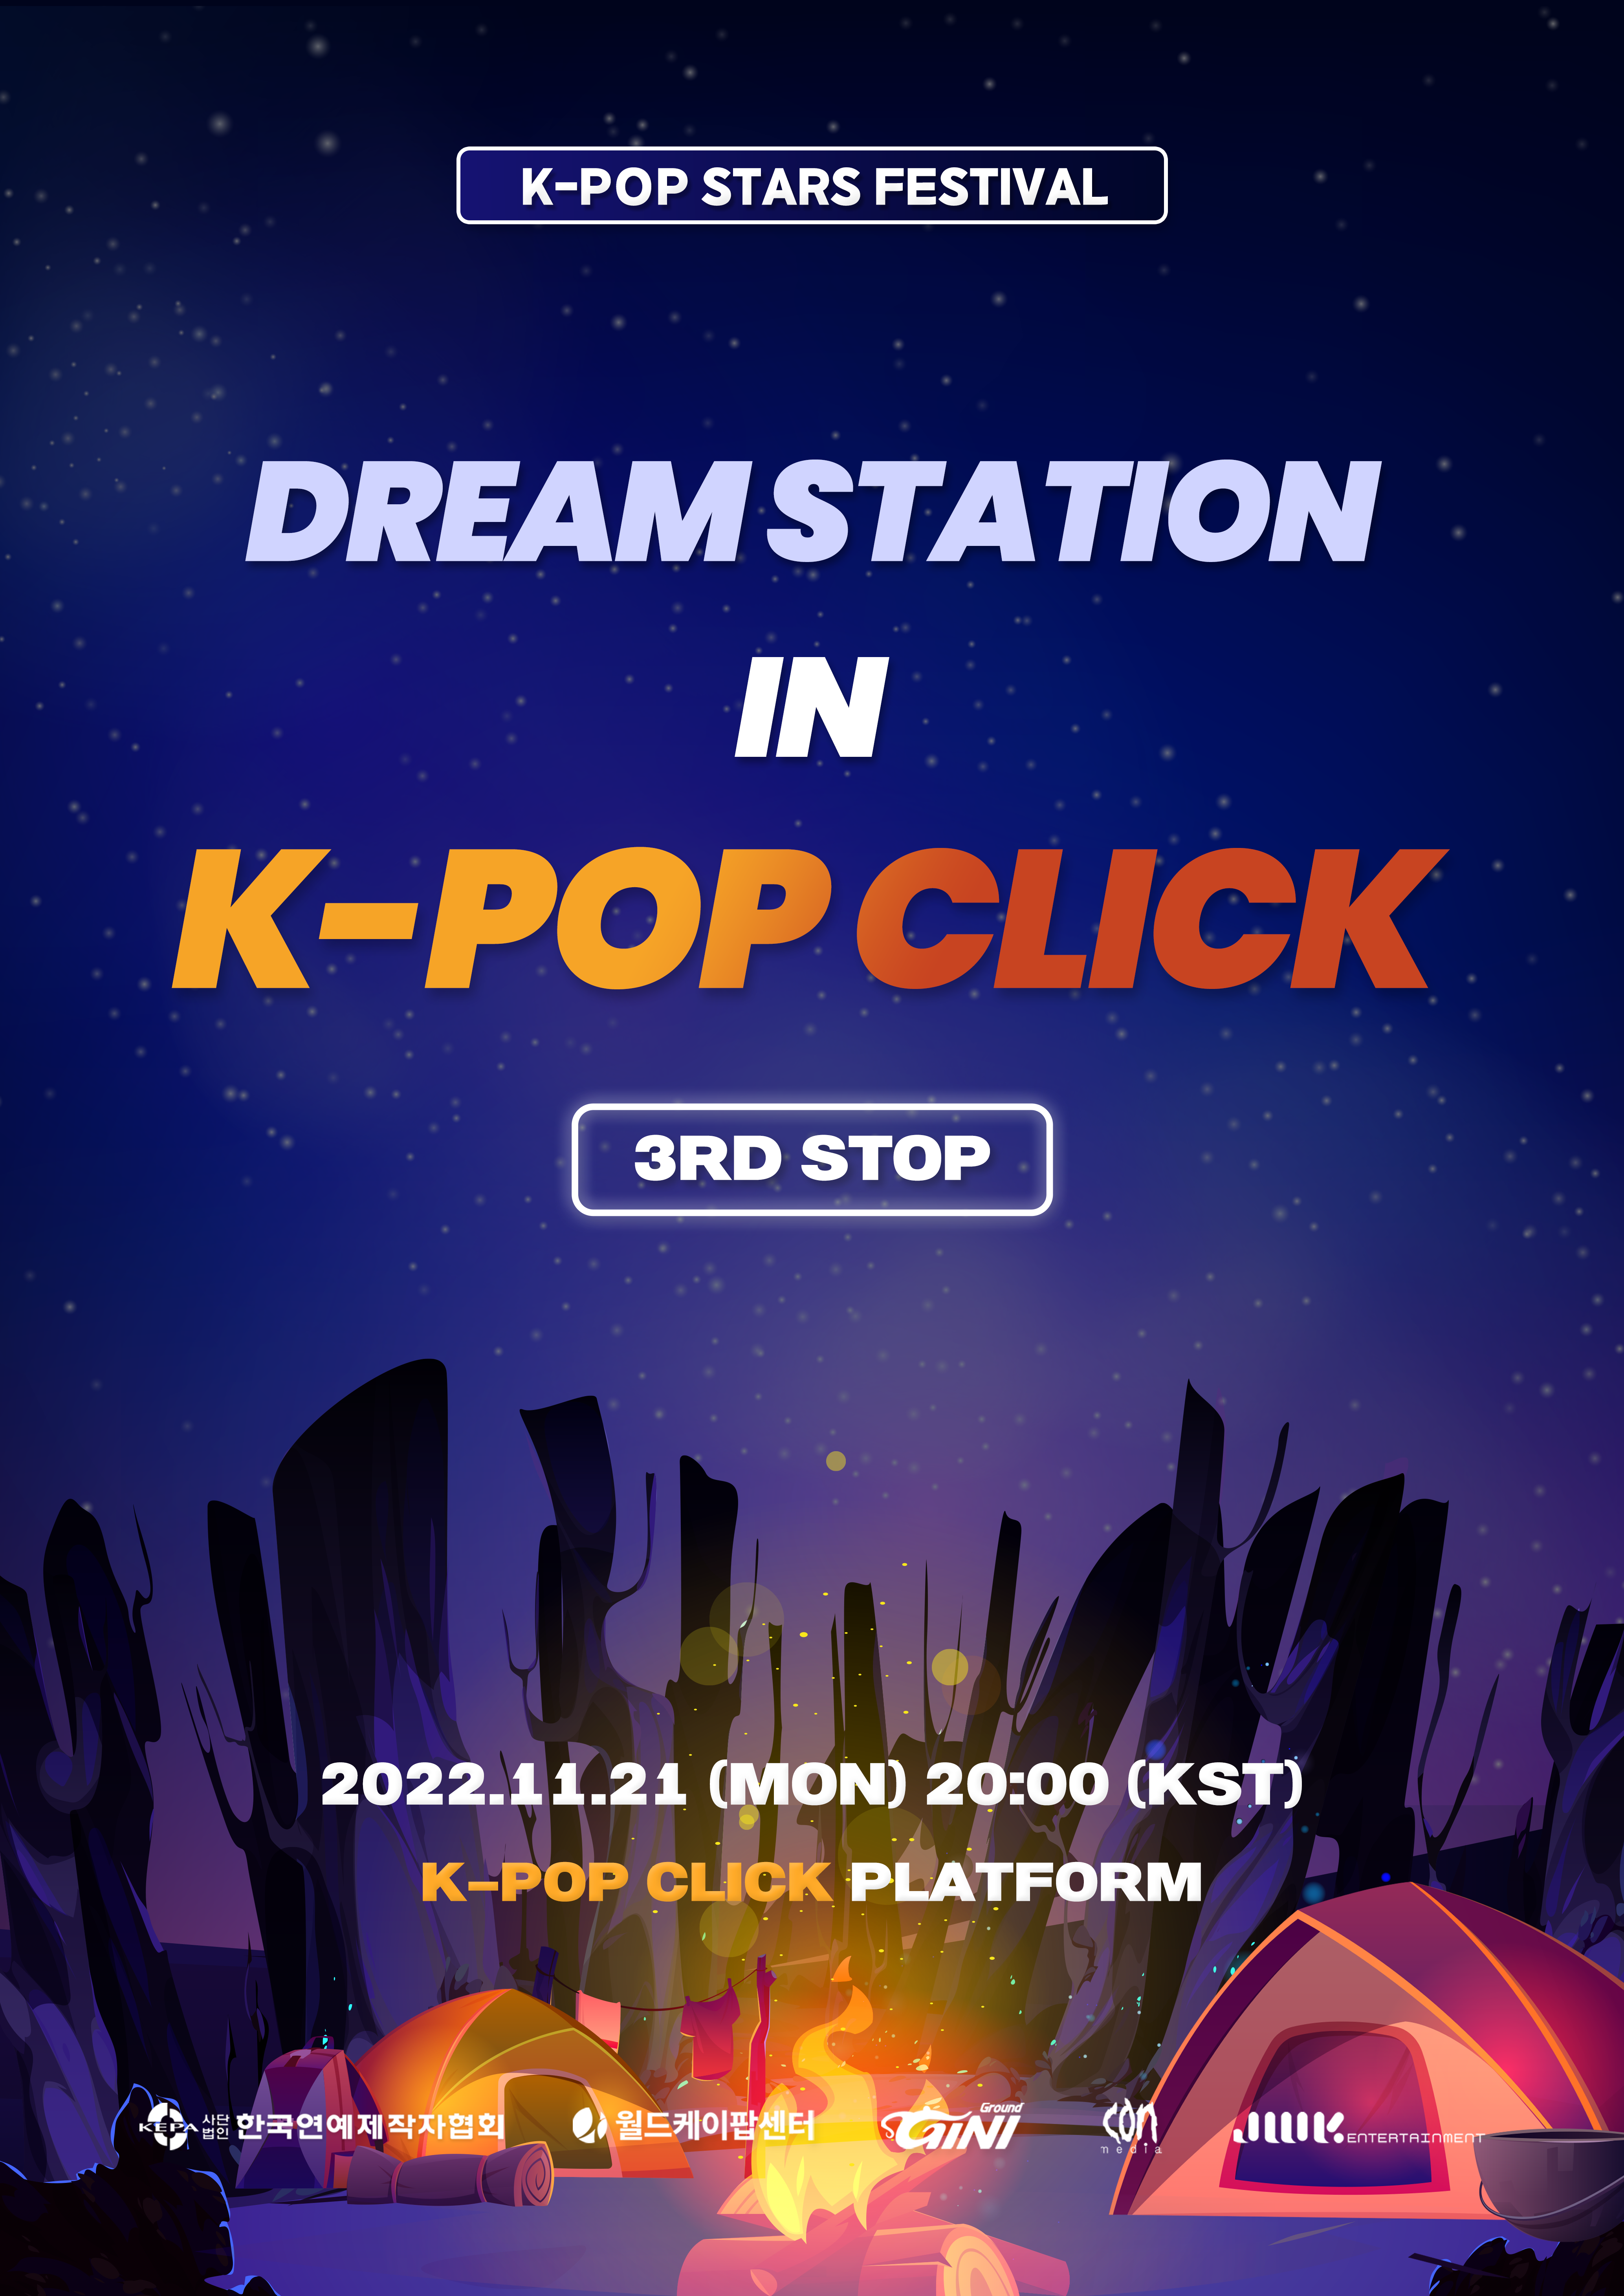 3RD DREAM STATION IN K-POP CLICK